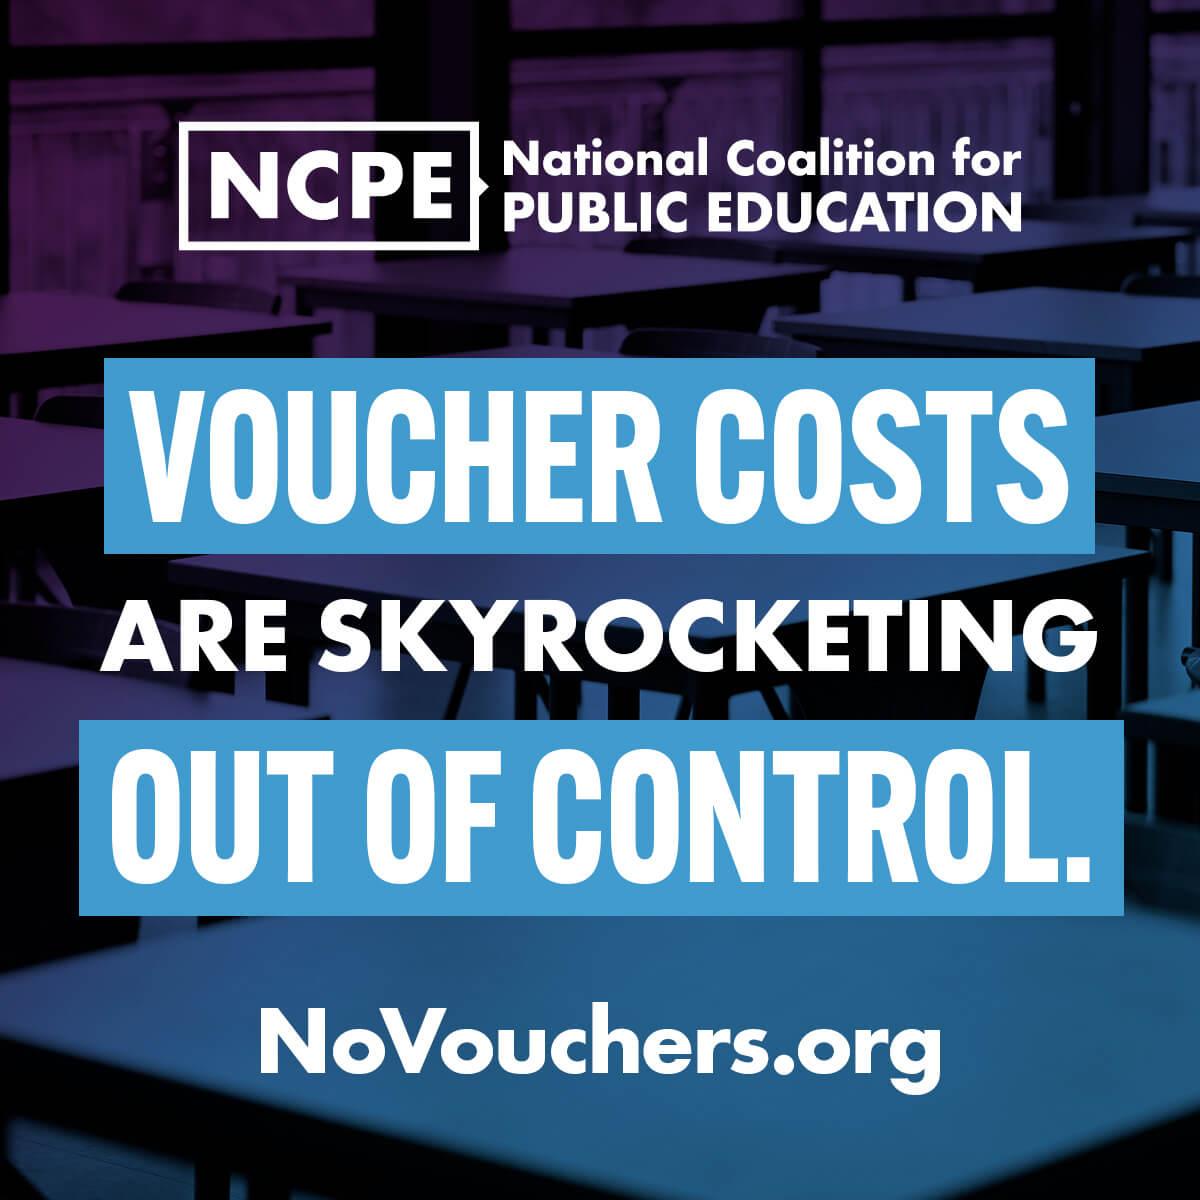 Voucher costs are skyrocketing out of control